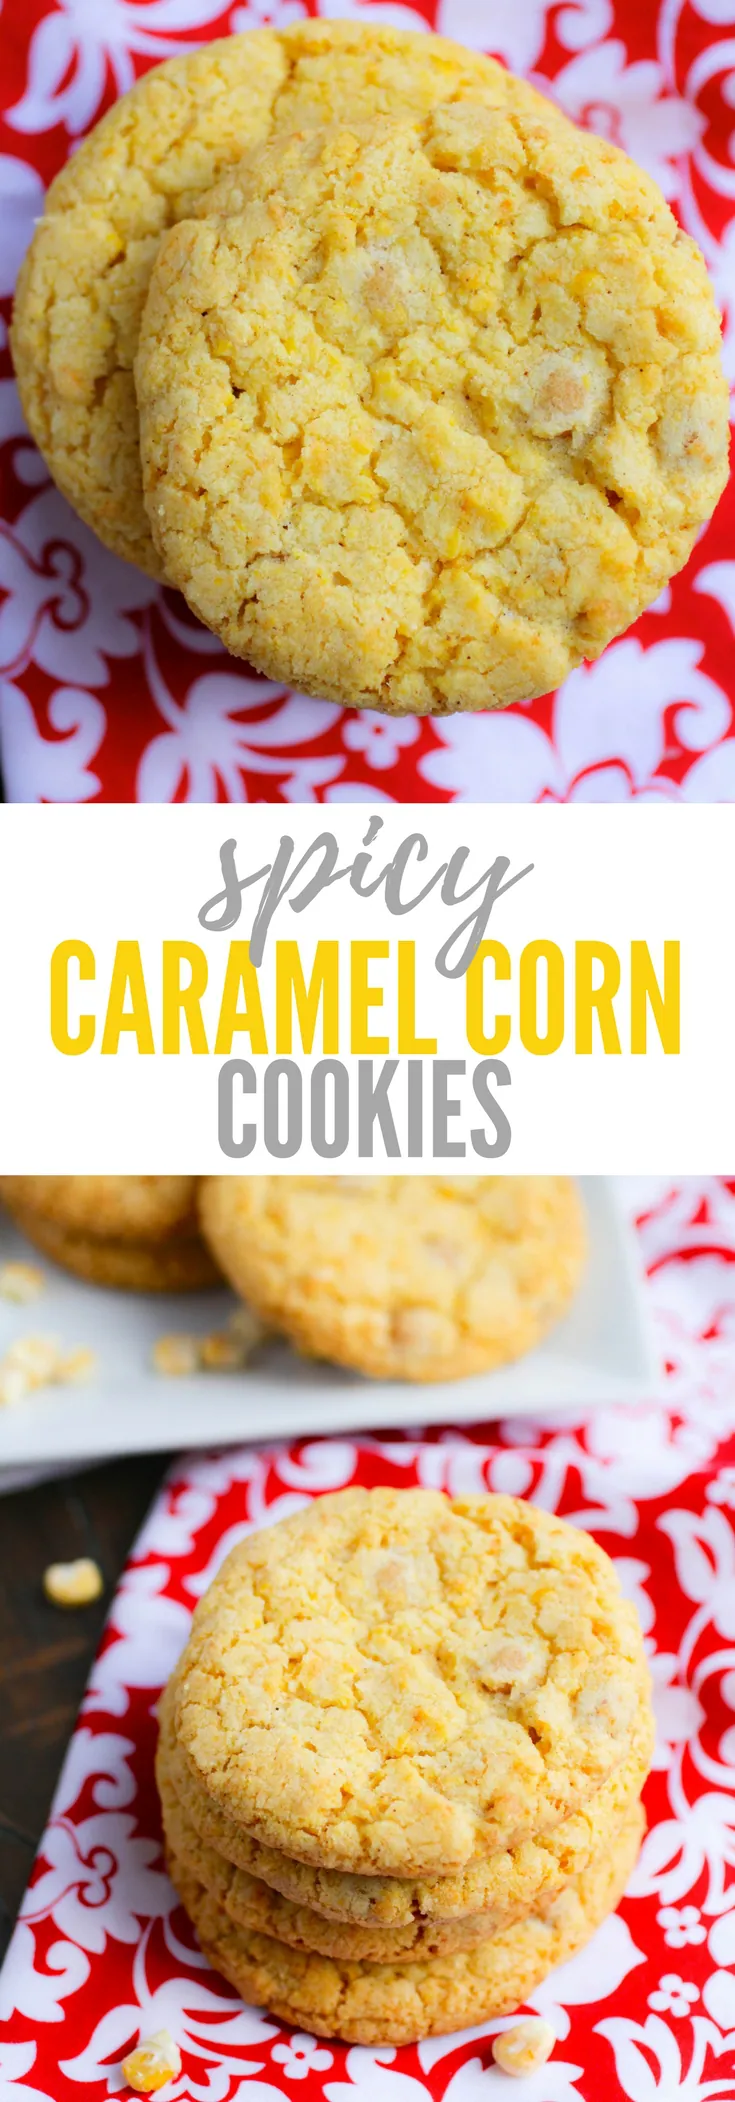 Spicy Caramel Corn Cookies are a fun treat as dessert. You'll love these unusually delicious Spicy Caramel Corn Cookies.